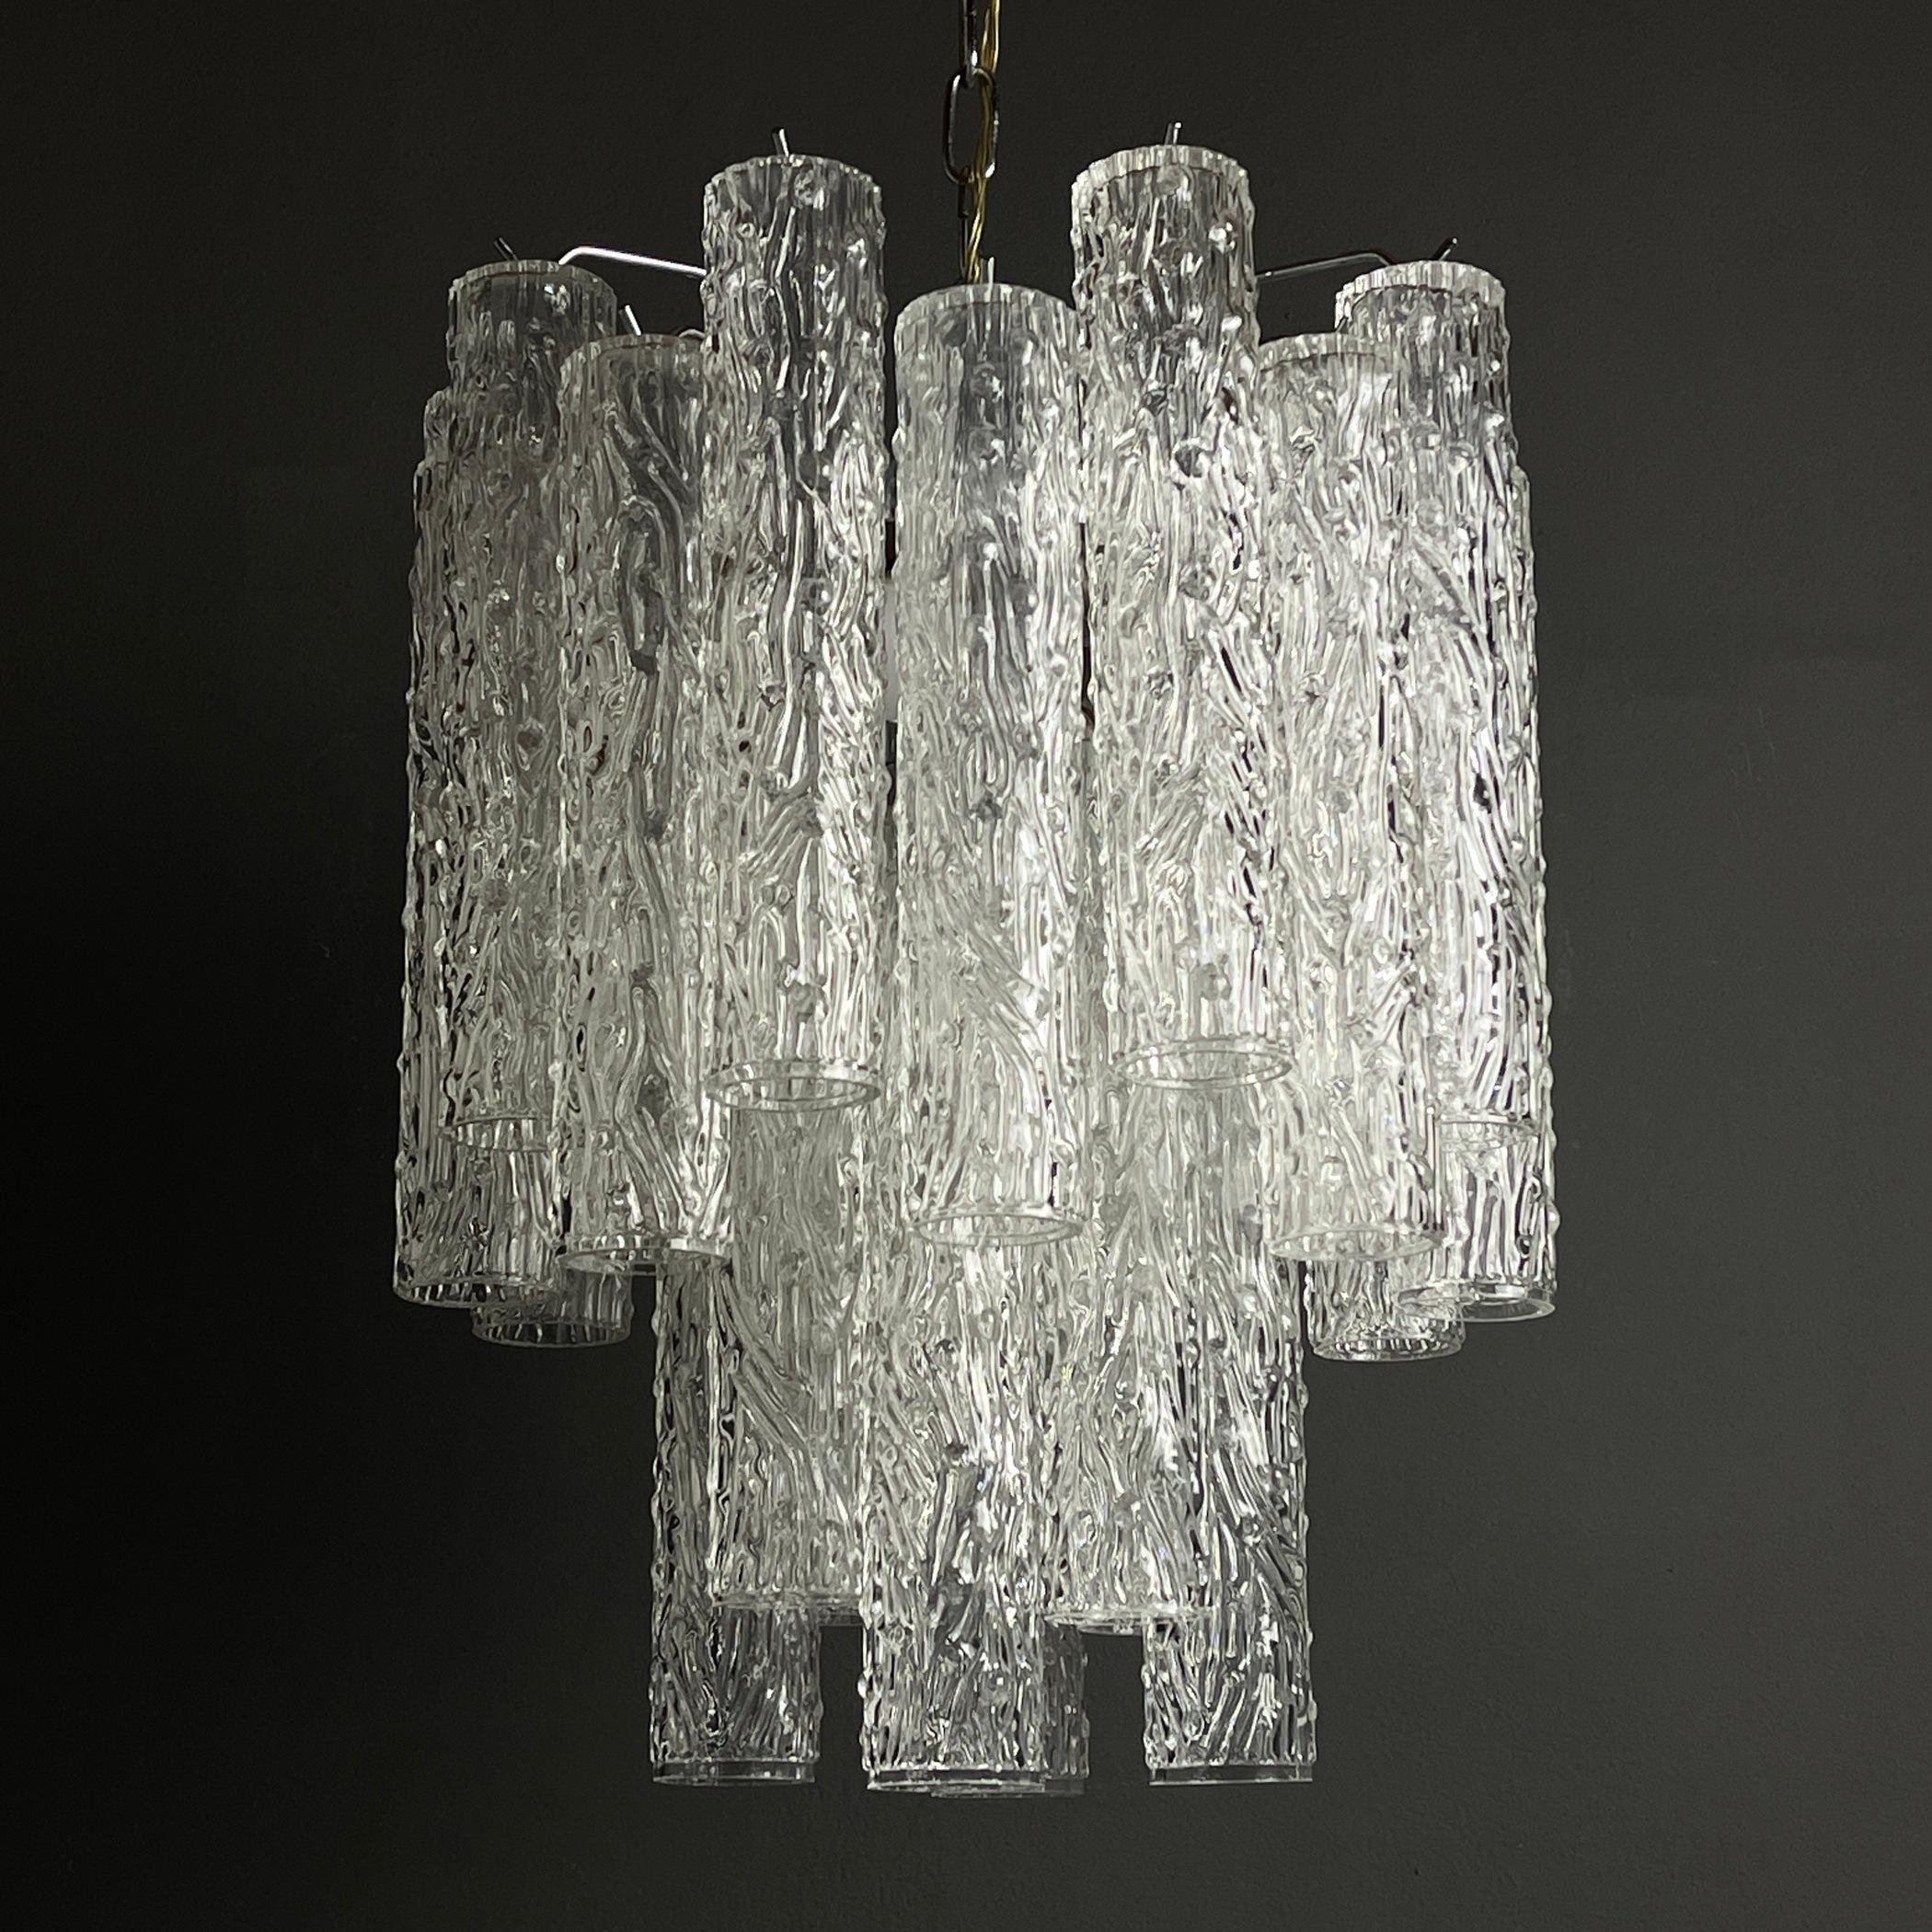 The elegant Murano glass chandelier made in Italy in the 60s. Designer Toni Zuccheri for Venini & Co. Venini & Co. played a leading role in the revival of Italy’s high-end glass industry, pairing innovative modernist designers with the skilled